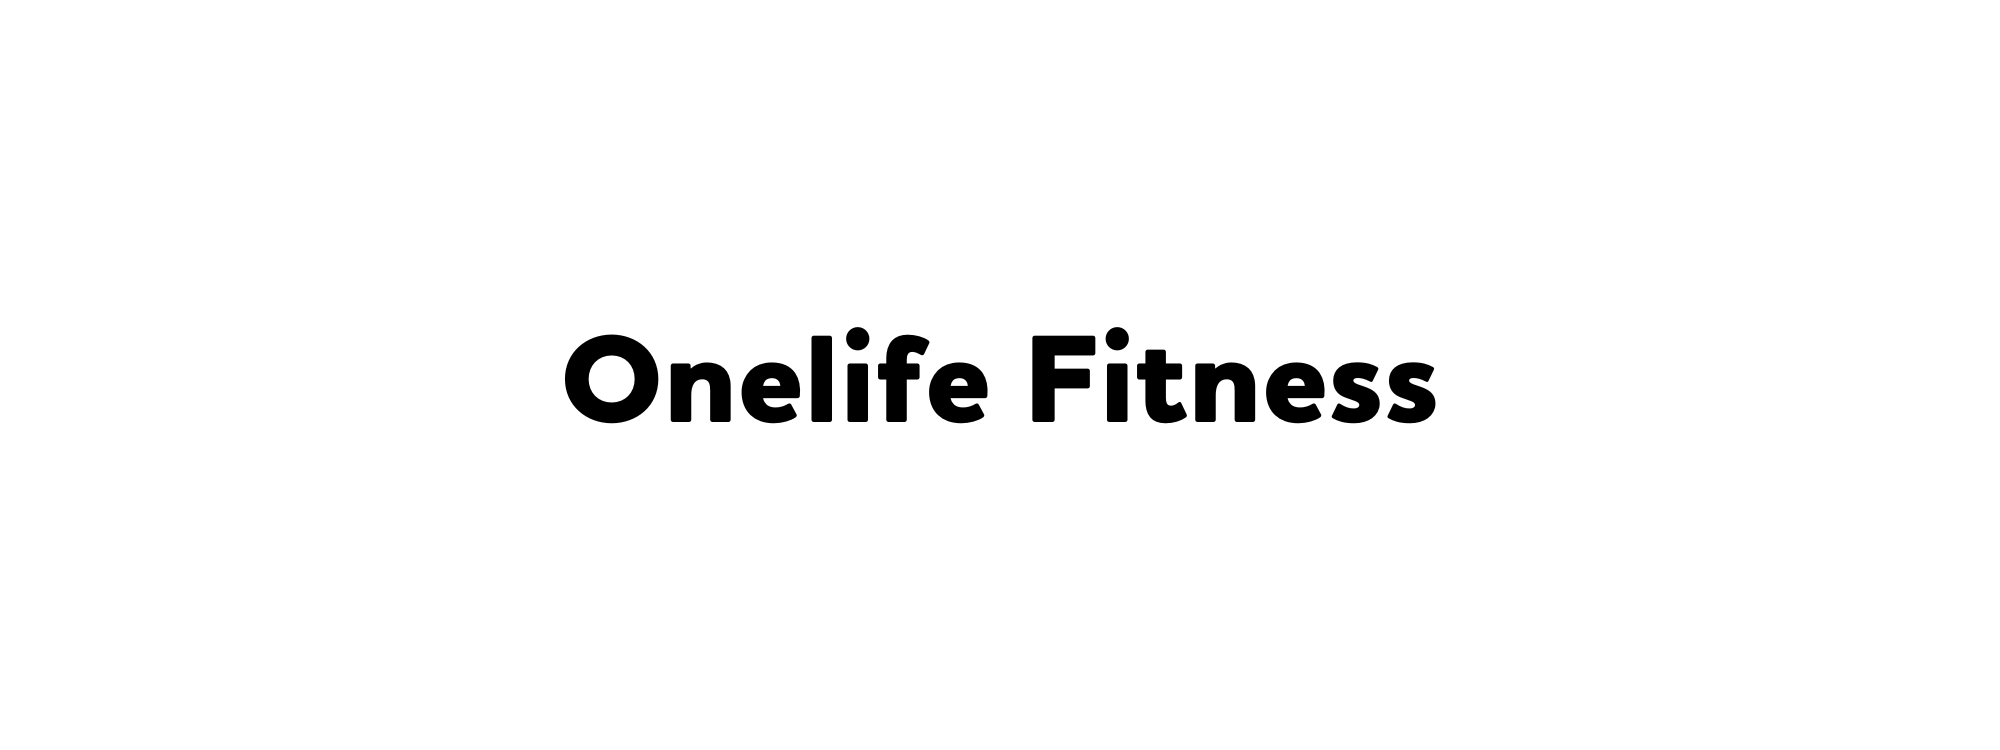 8a. Onelife Fitness (Friend)